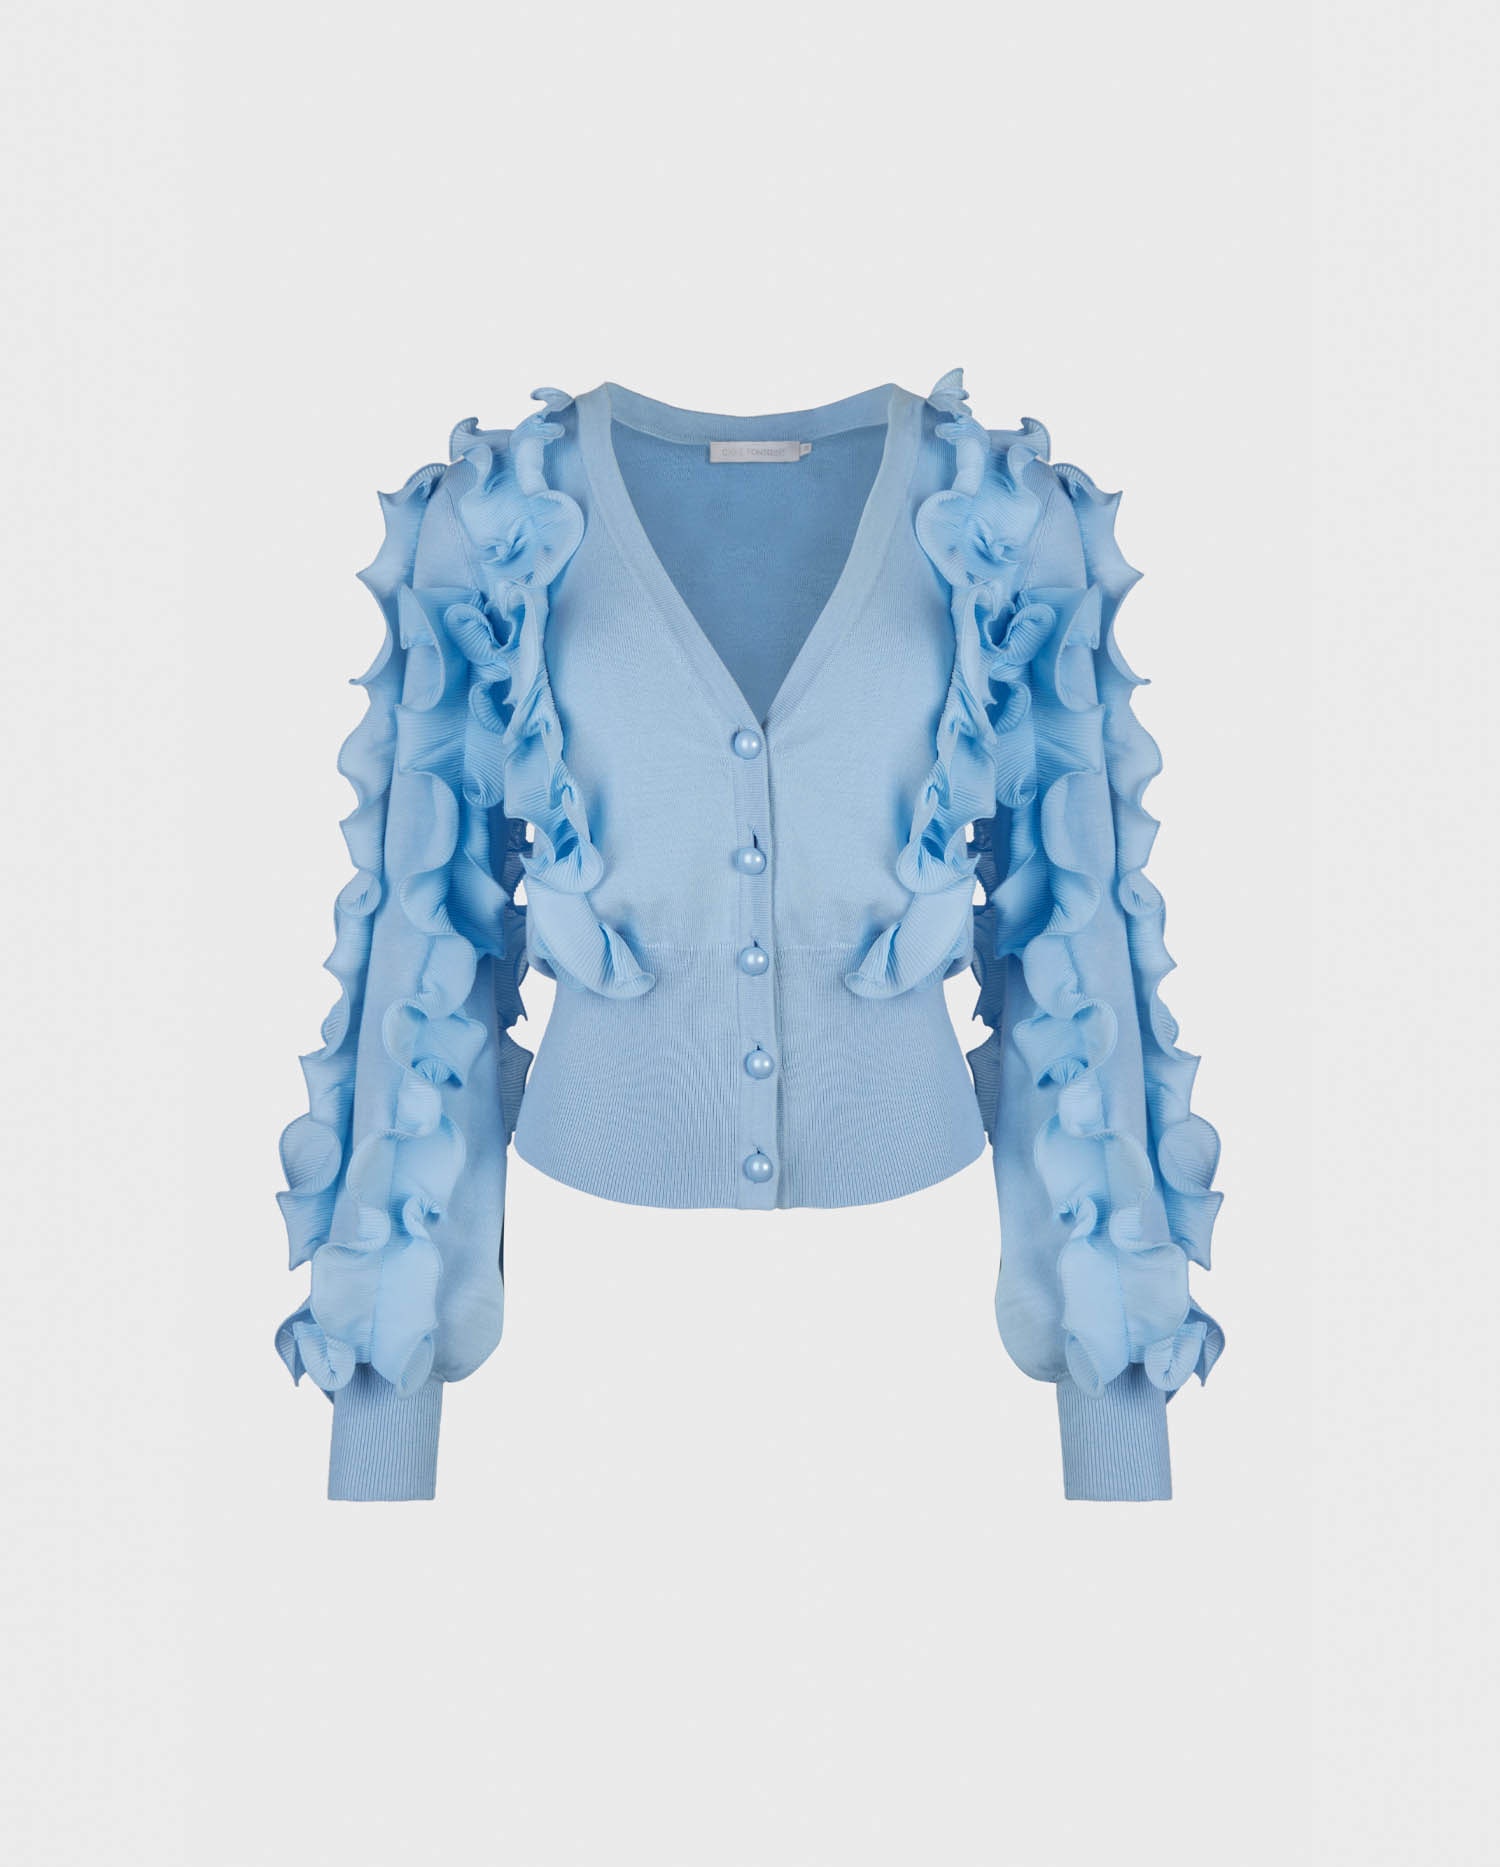 Explore the CILINE Long sleeve statement ruffle cardigan with jeweled button details in riviera color from ANNE FONTAINE